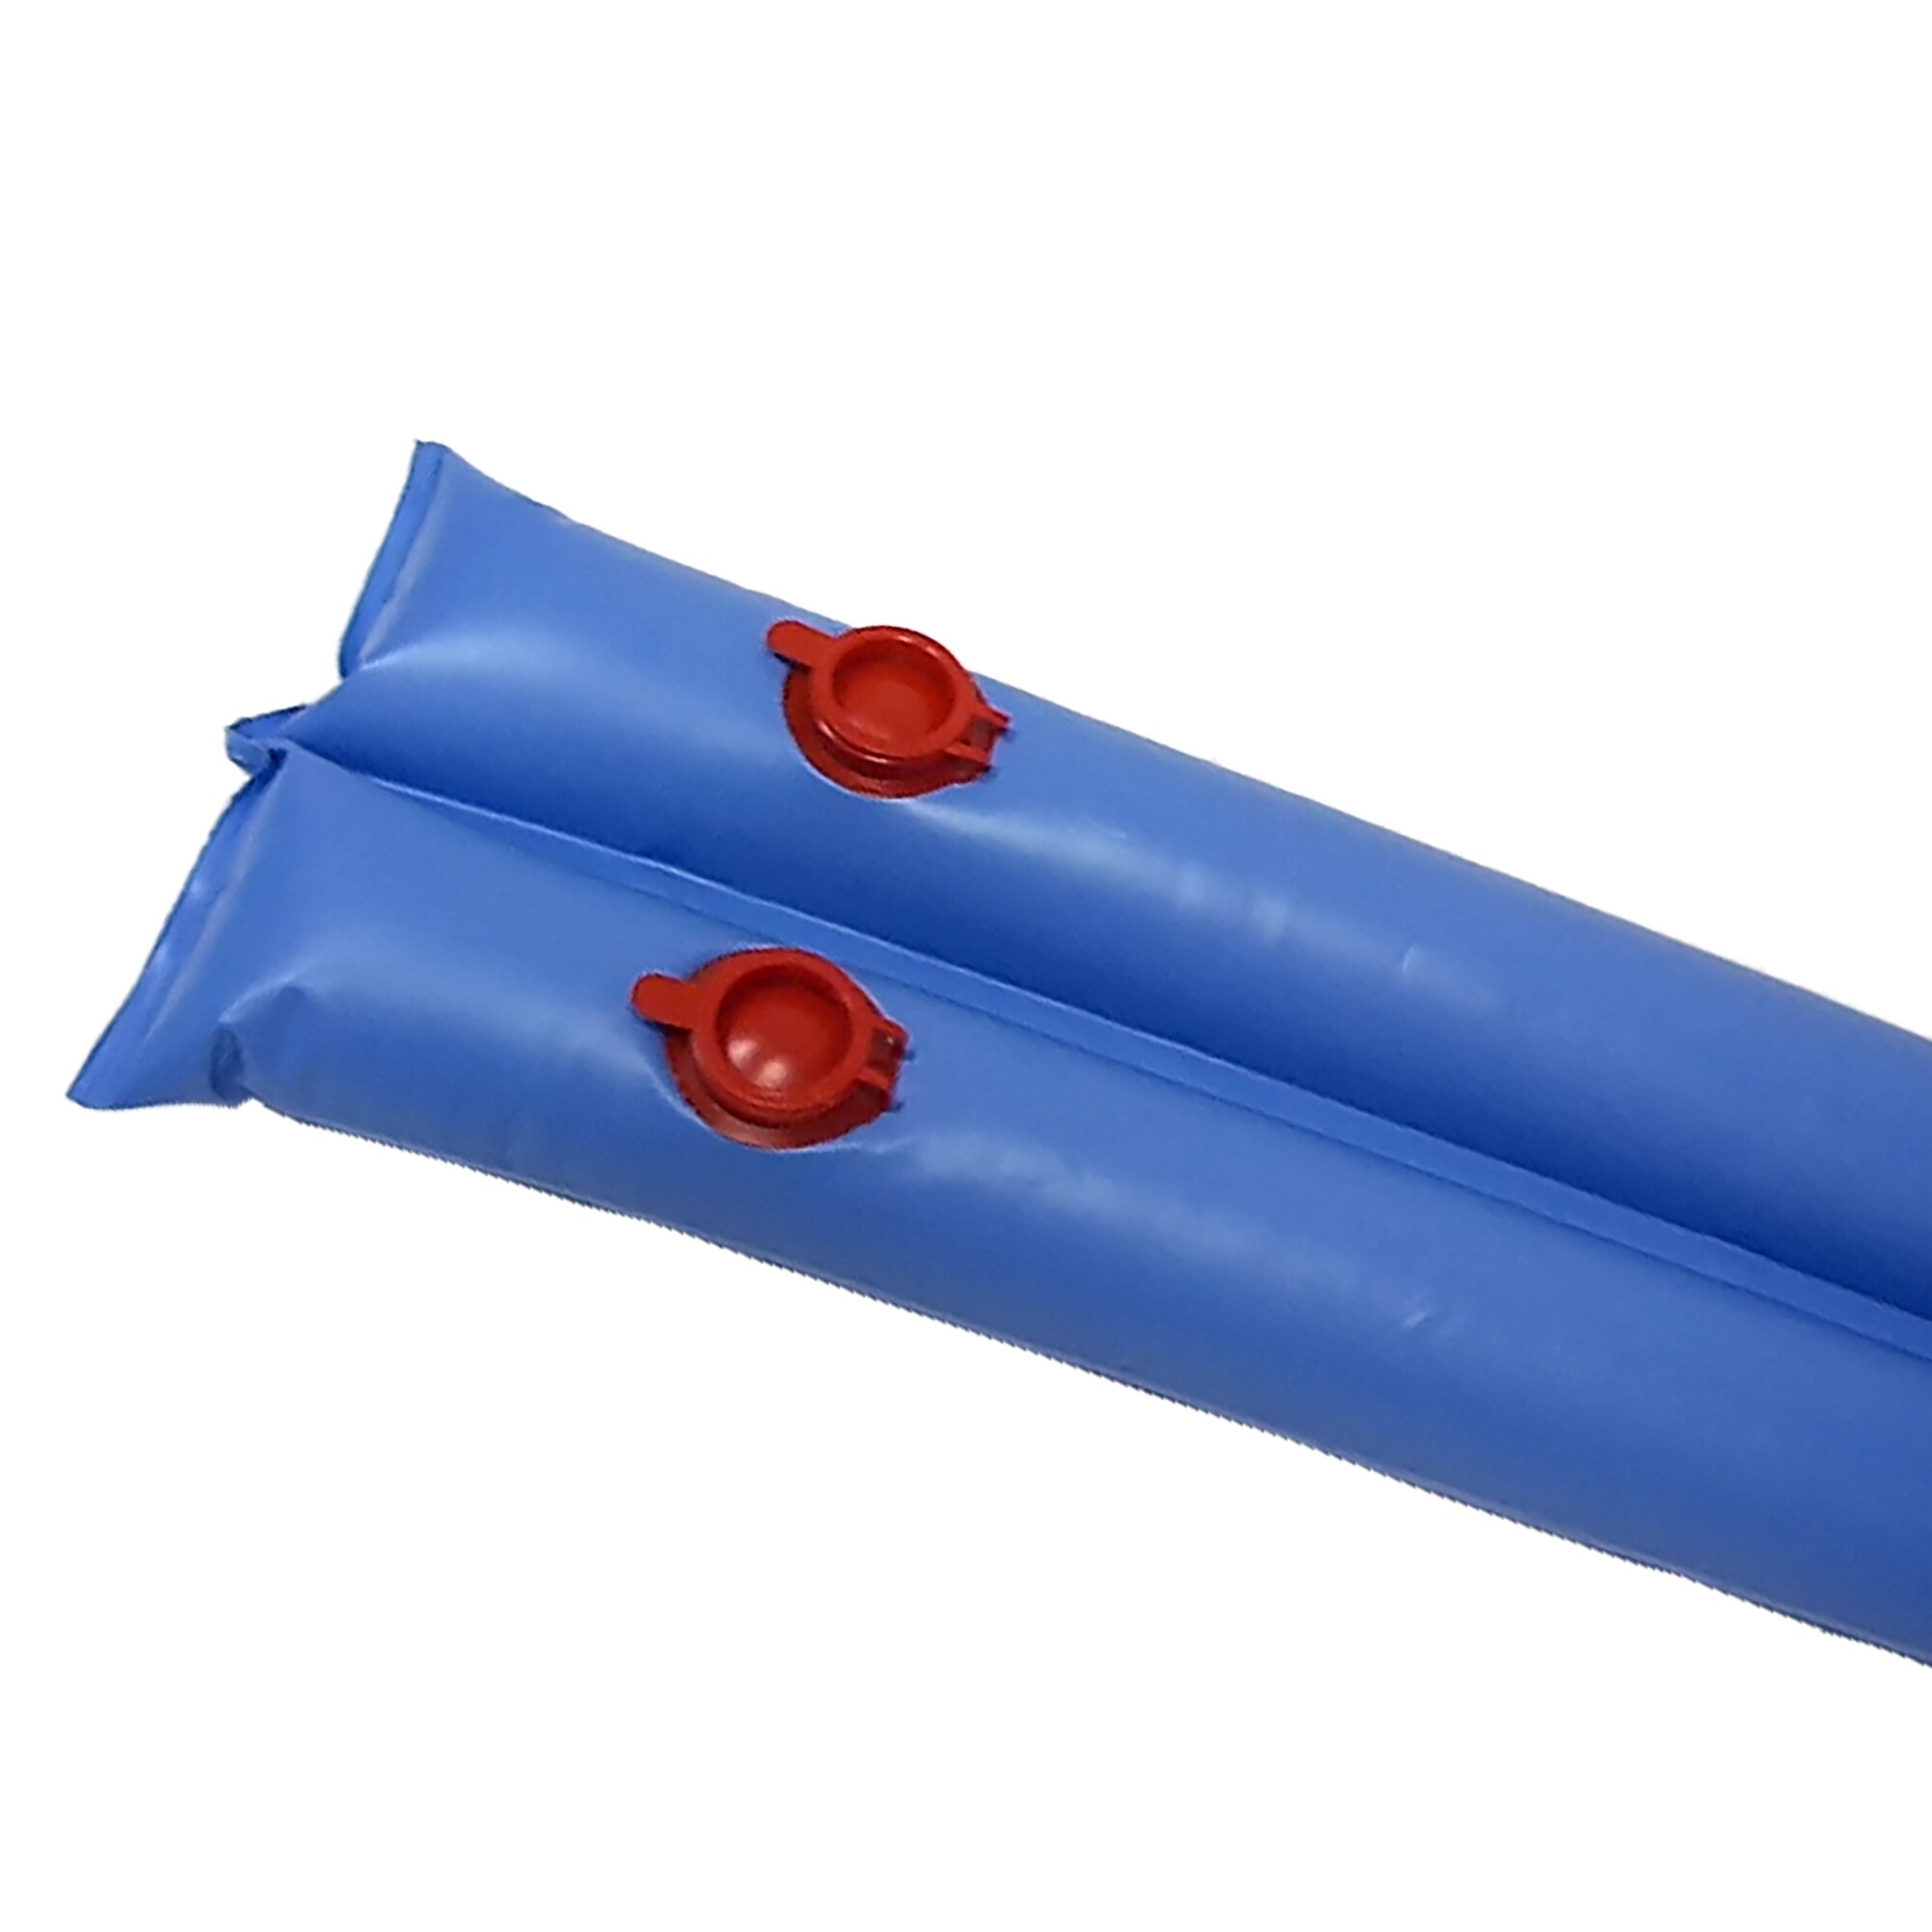 3 Pack Of Winter Water Tubes Bags Are 8ft Doubles In-Ground Swimming Pool Covers 